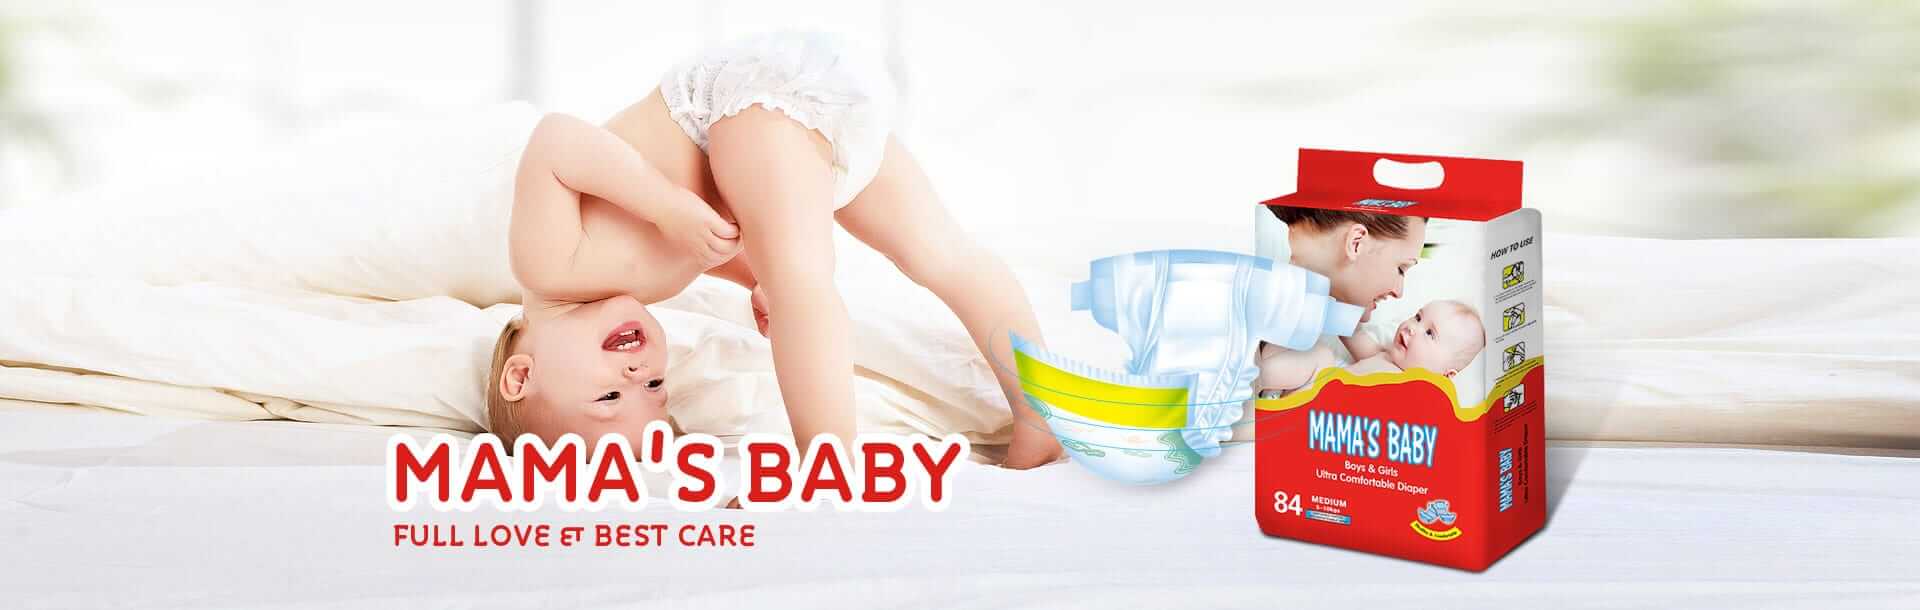 Wholesale Plus Size Period Diapers Products at Factory Prices from  Manufacturers in China, India, Korea, etc.